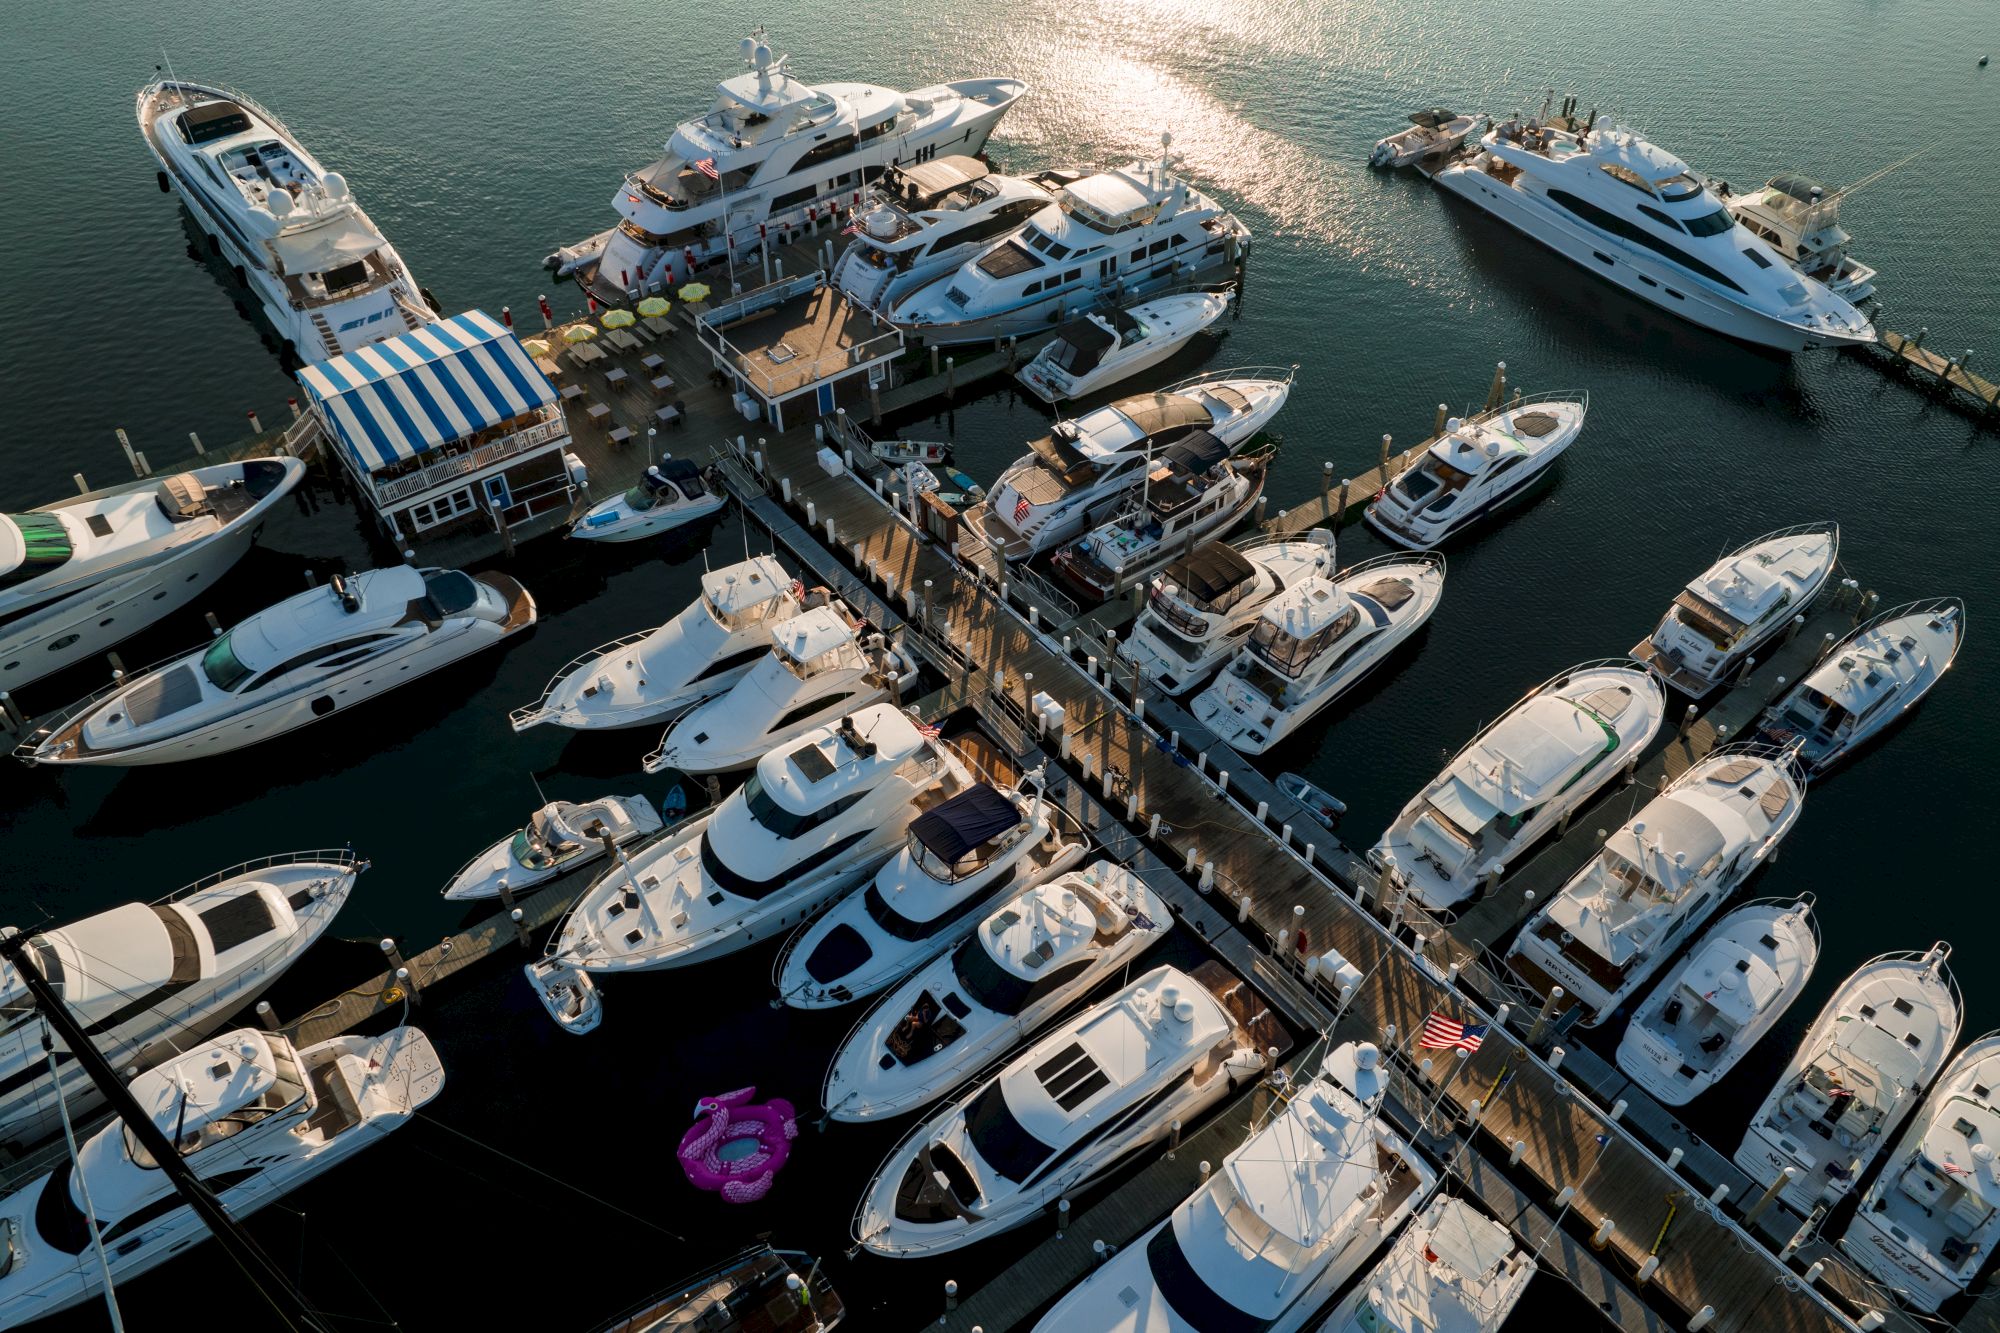 The image shows a marina with numerous yachts and boats moored at the docks, with sunlight reflecting off the water and vessels arranged closely.